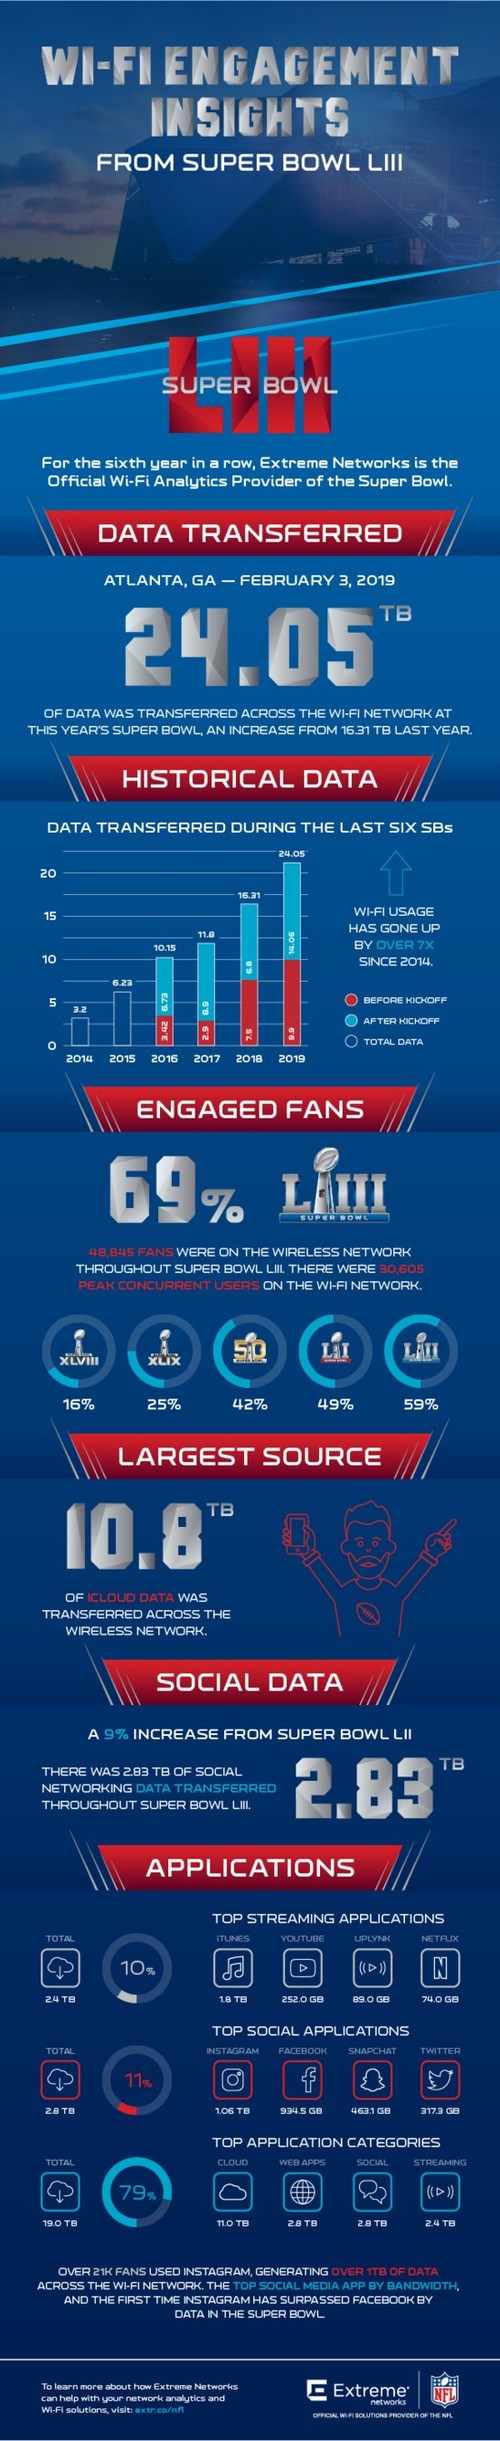 Wi-Fi engagement insights from Super Bowl LIII from Extreme Networks, the Official Wi-Fi Solutions provider for the NFL.